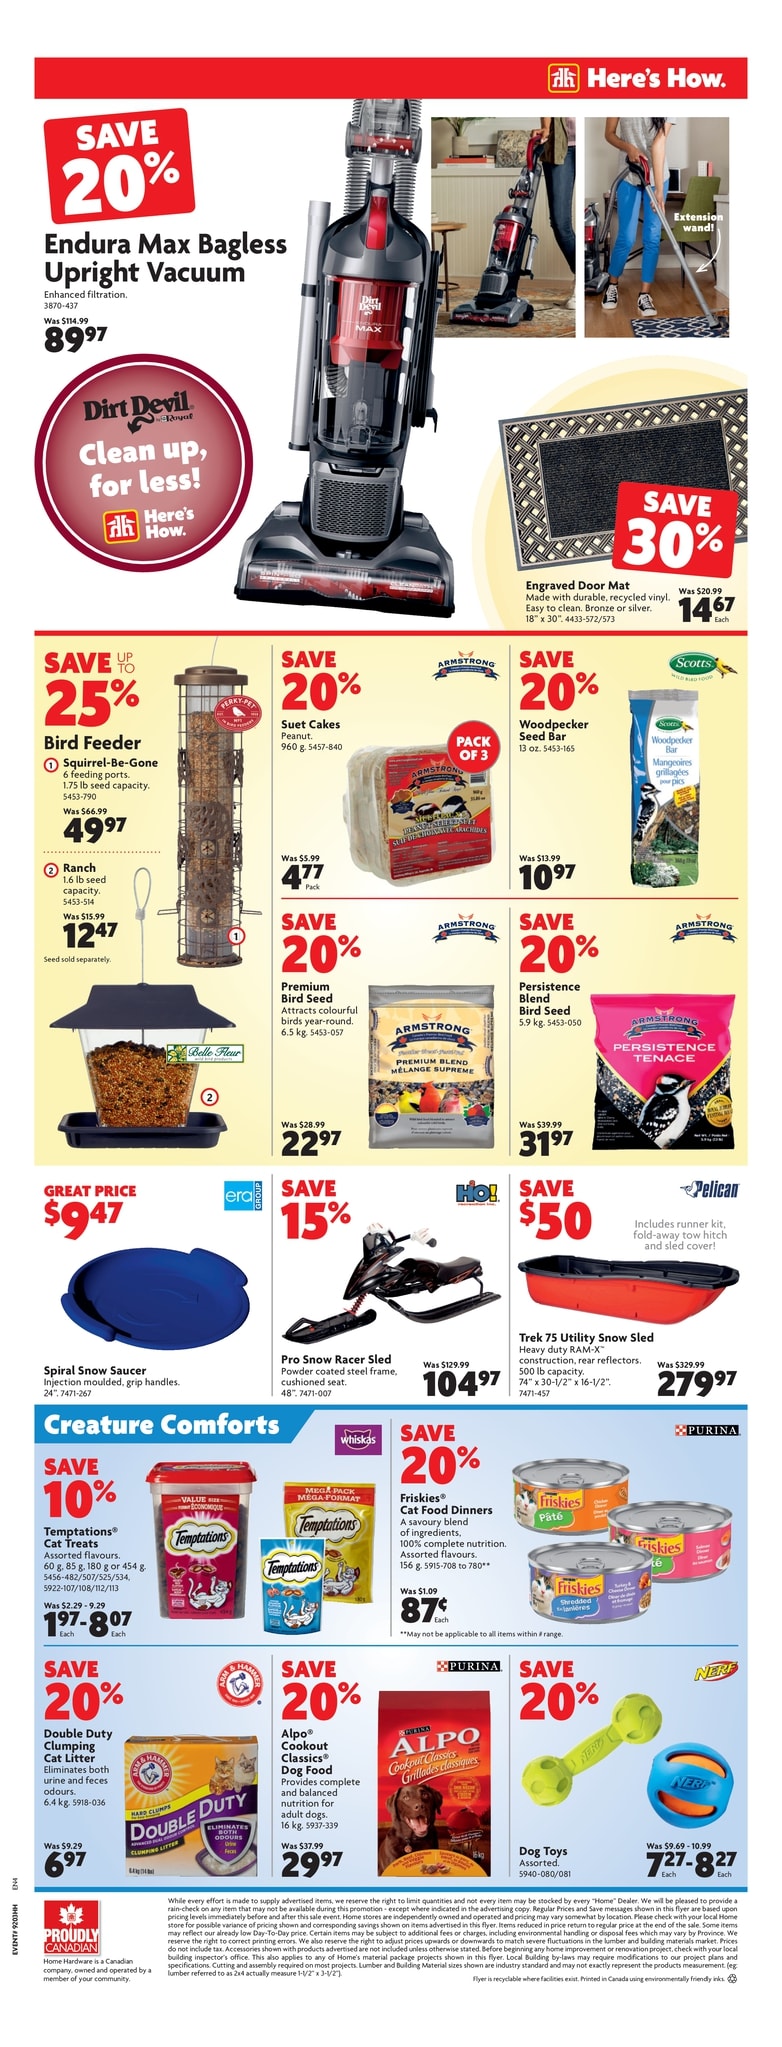 Home Hardware - Weekly Flyer Specials - Page 8